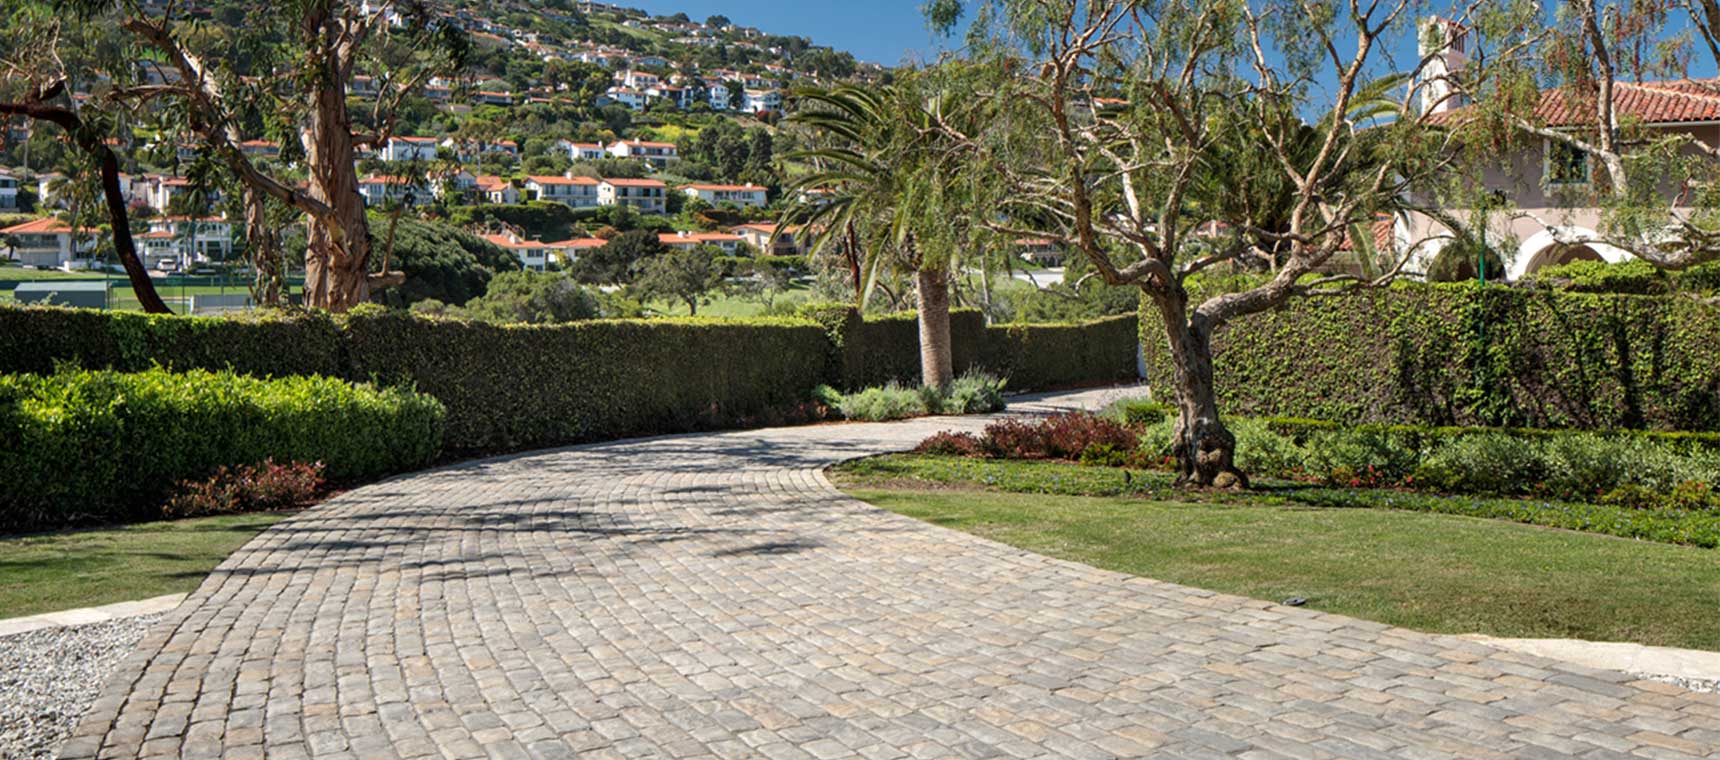 Traditional style pavers